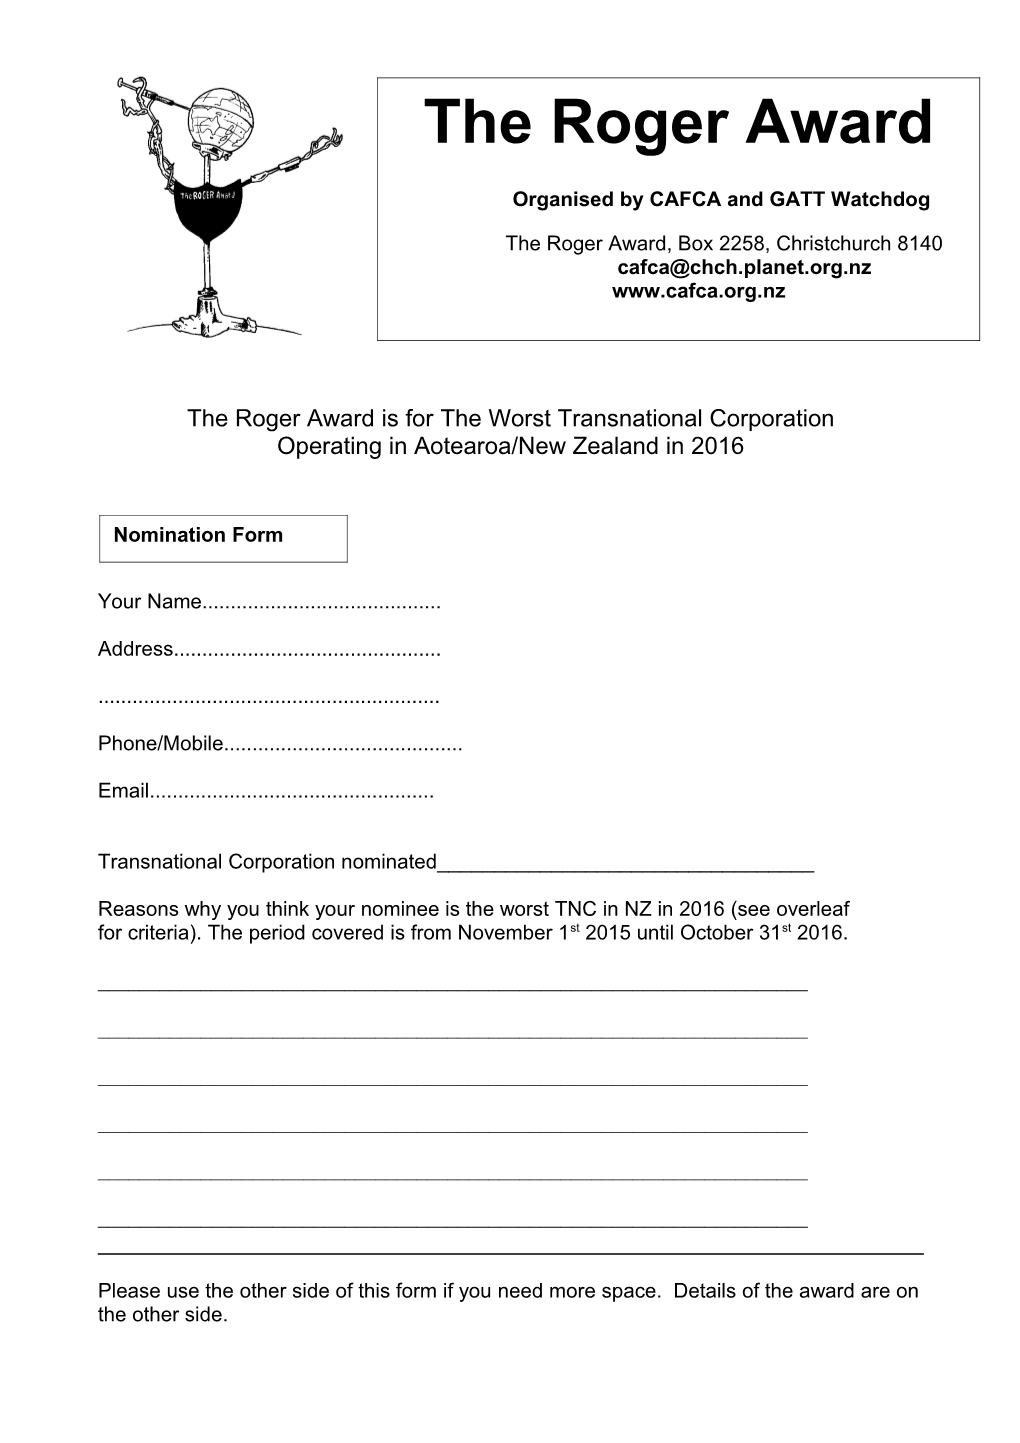 The Roger Award Is for the Worst Transnational Corporation